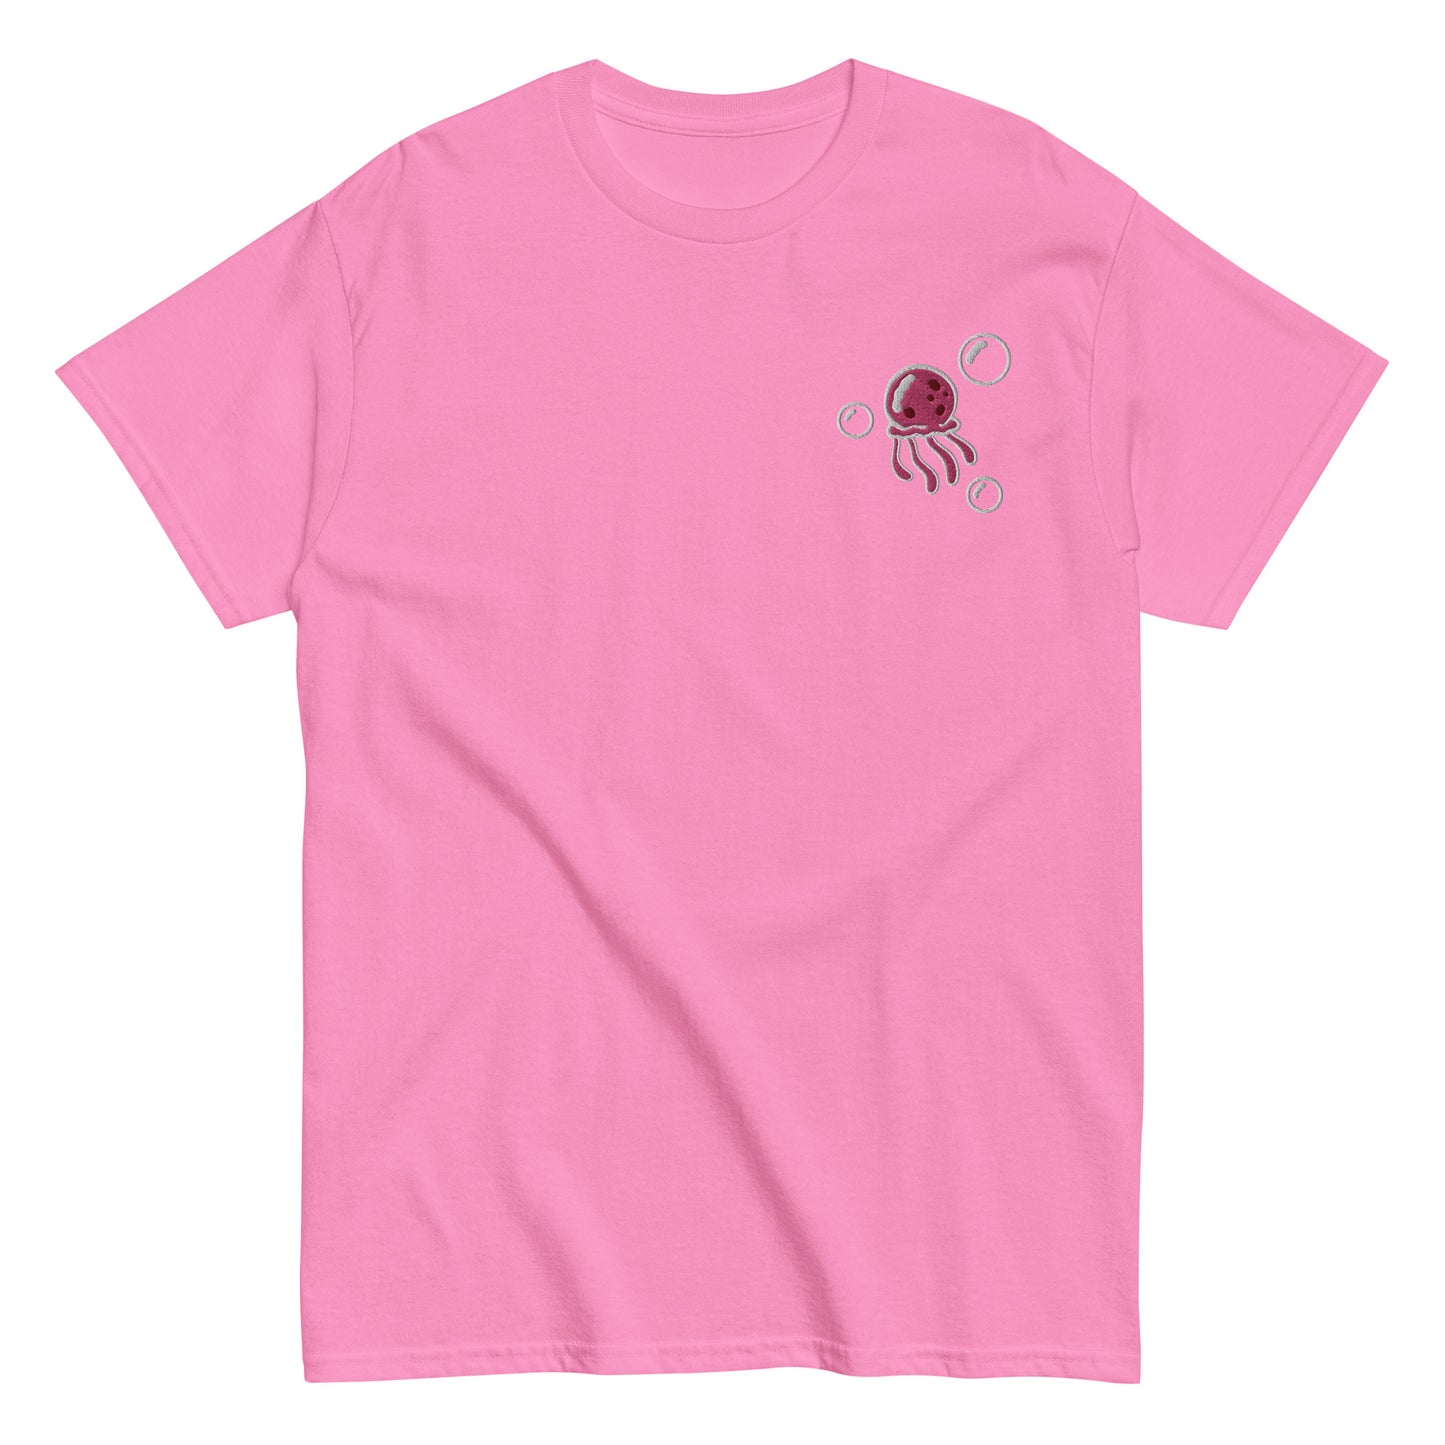 Jellyfish PINK embroidered t-shirt